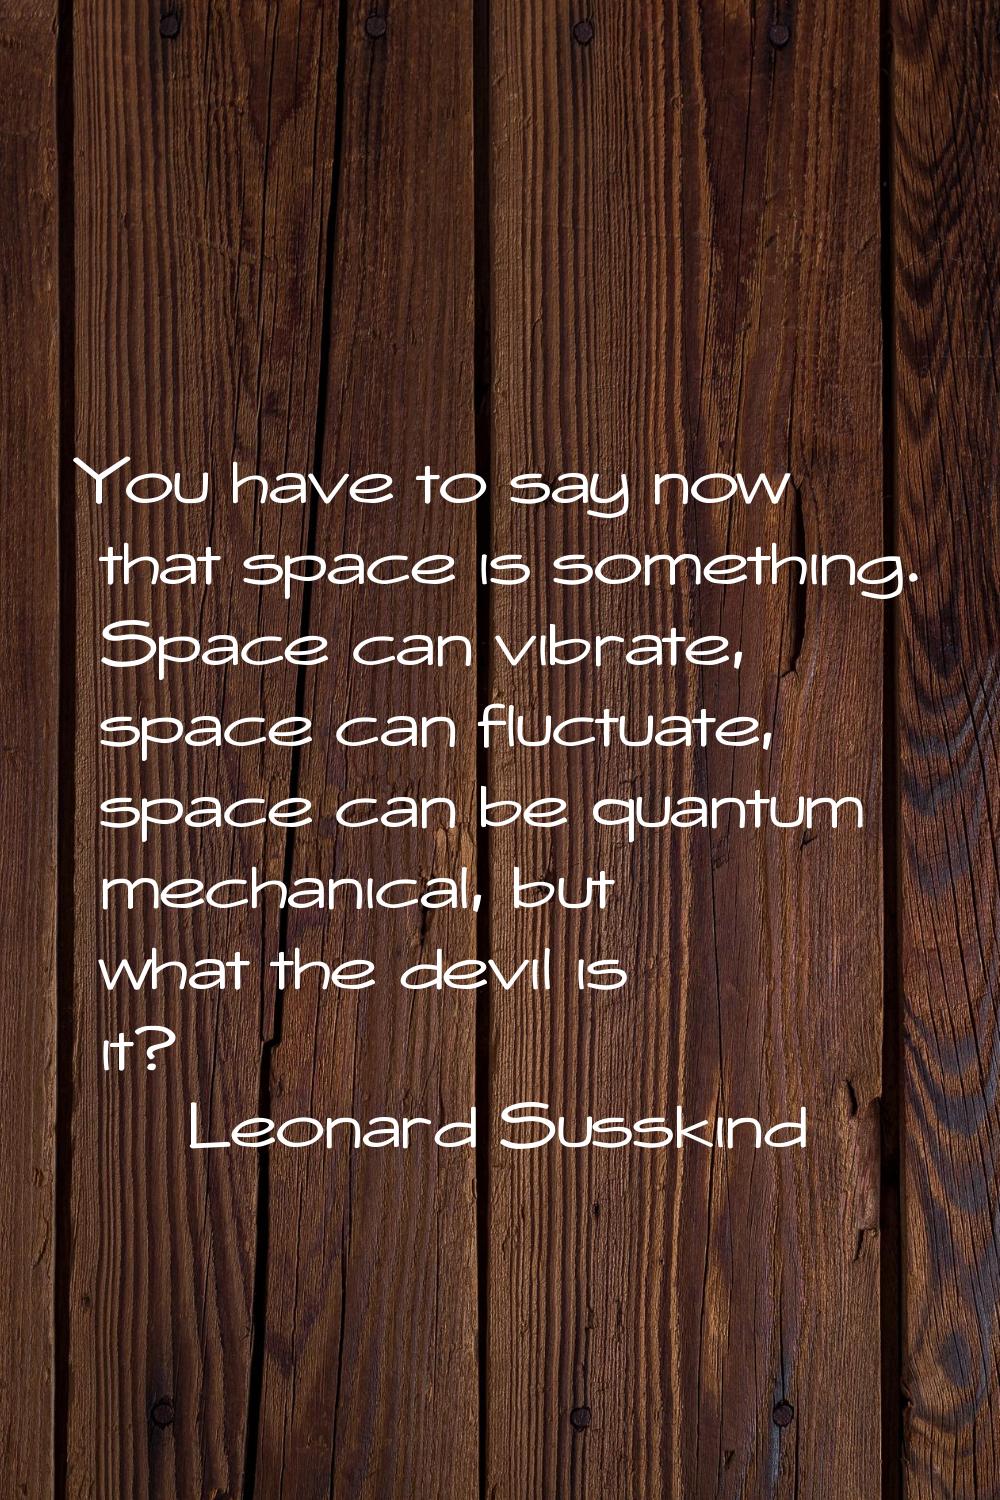 You have to say now that space is something. Space can vibrate, space can fluctuate, space can be q